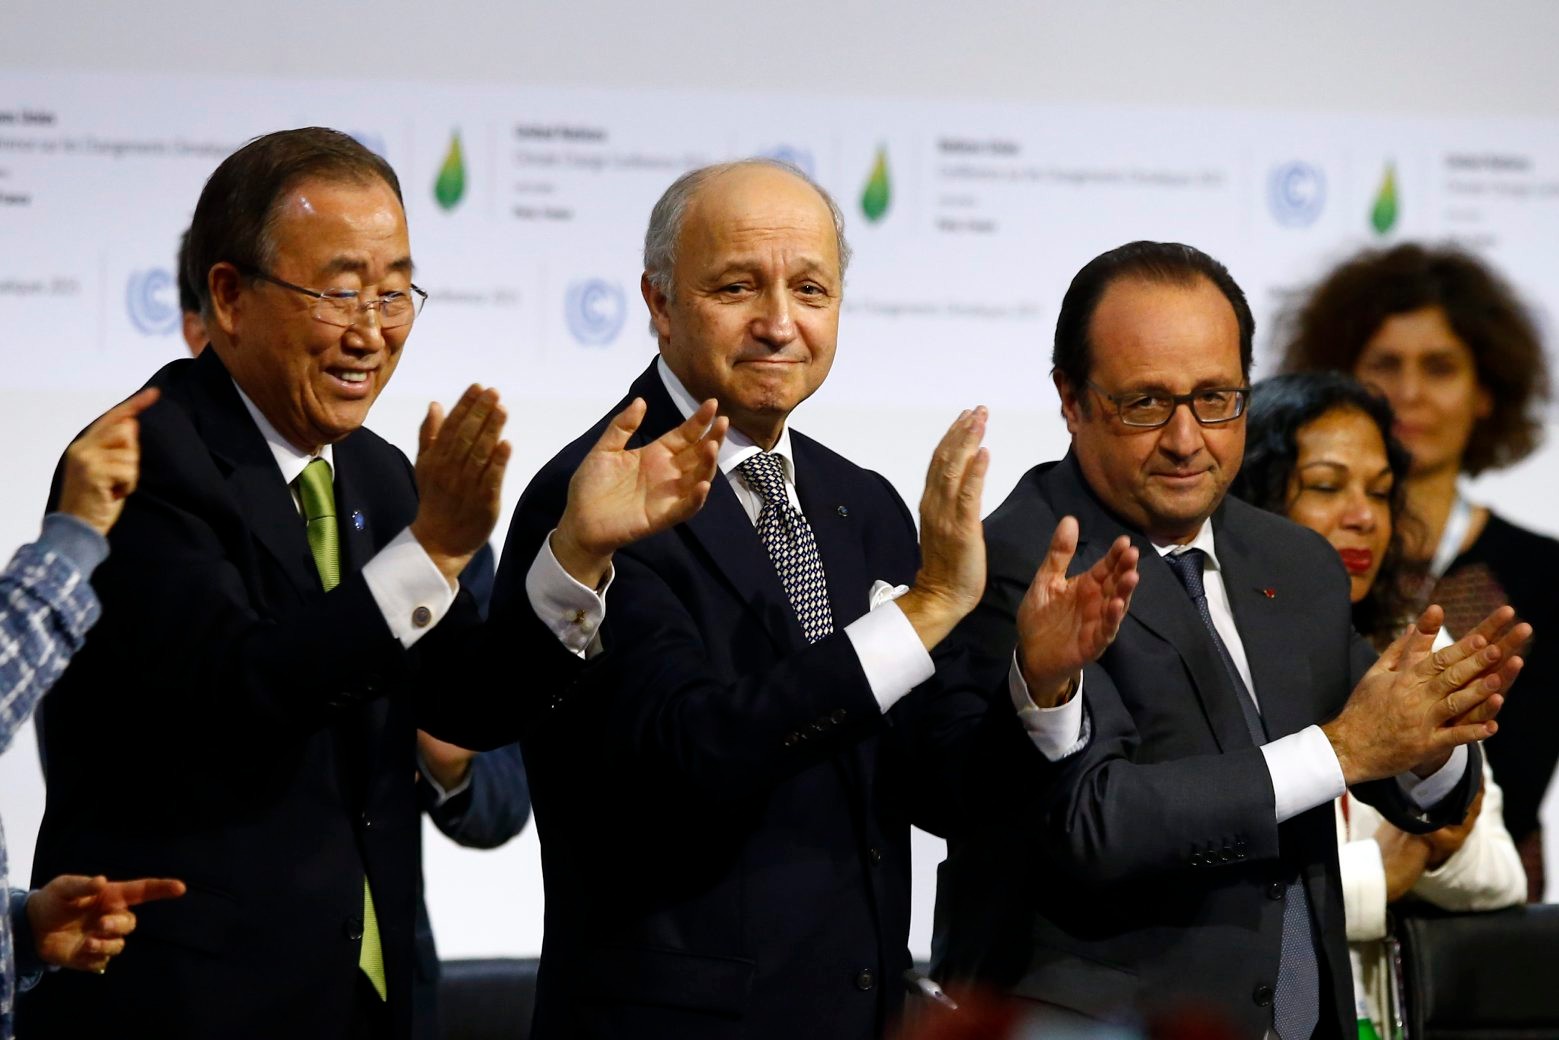 French President Francois Hollande, right, French Foreign Minister and president of the COP21 Laurent Fabius, center, and United Nations Secretary General Ban ki-Moon applaud after the final conference at the COP21, the United Nations conference on climate change, in Le Bourget, north of Paris, Saturday, Dec.12, 2015. Governments have adopted a global agreement that for the first time asks all countries to reduce or rein in their greenhouse gas emissions. (AP Photo/Francois Mori) APTOPIX France Climate Countdown